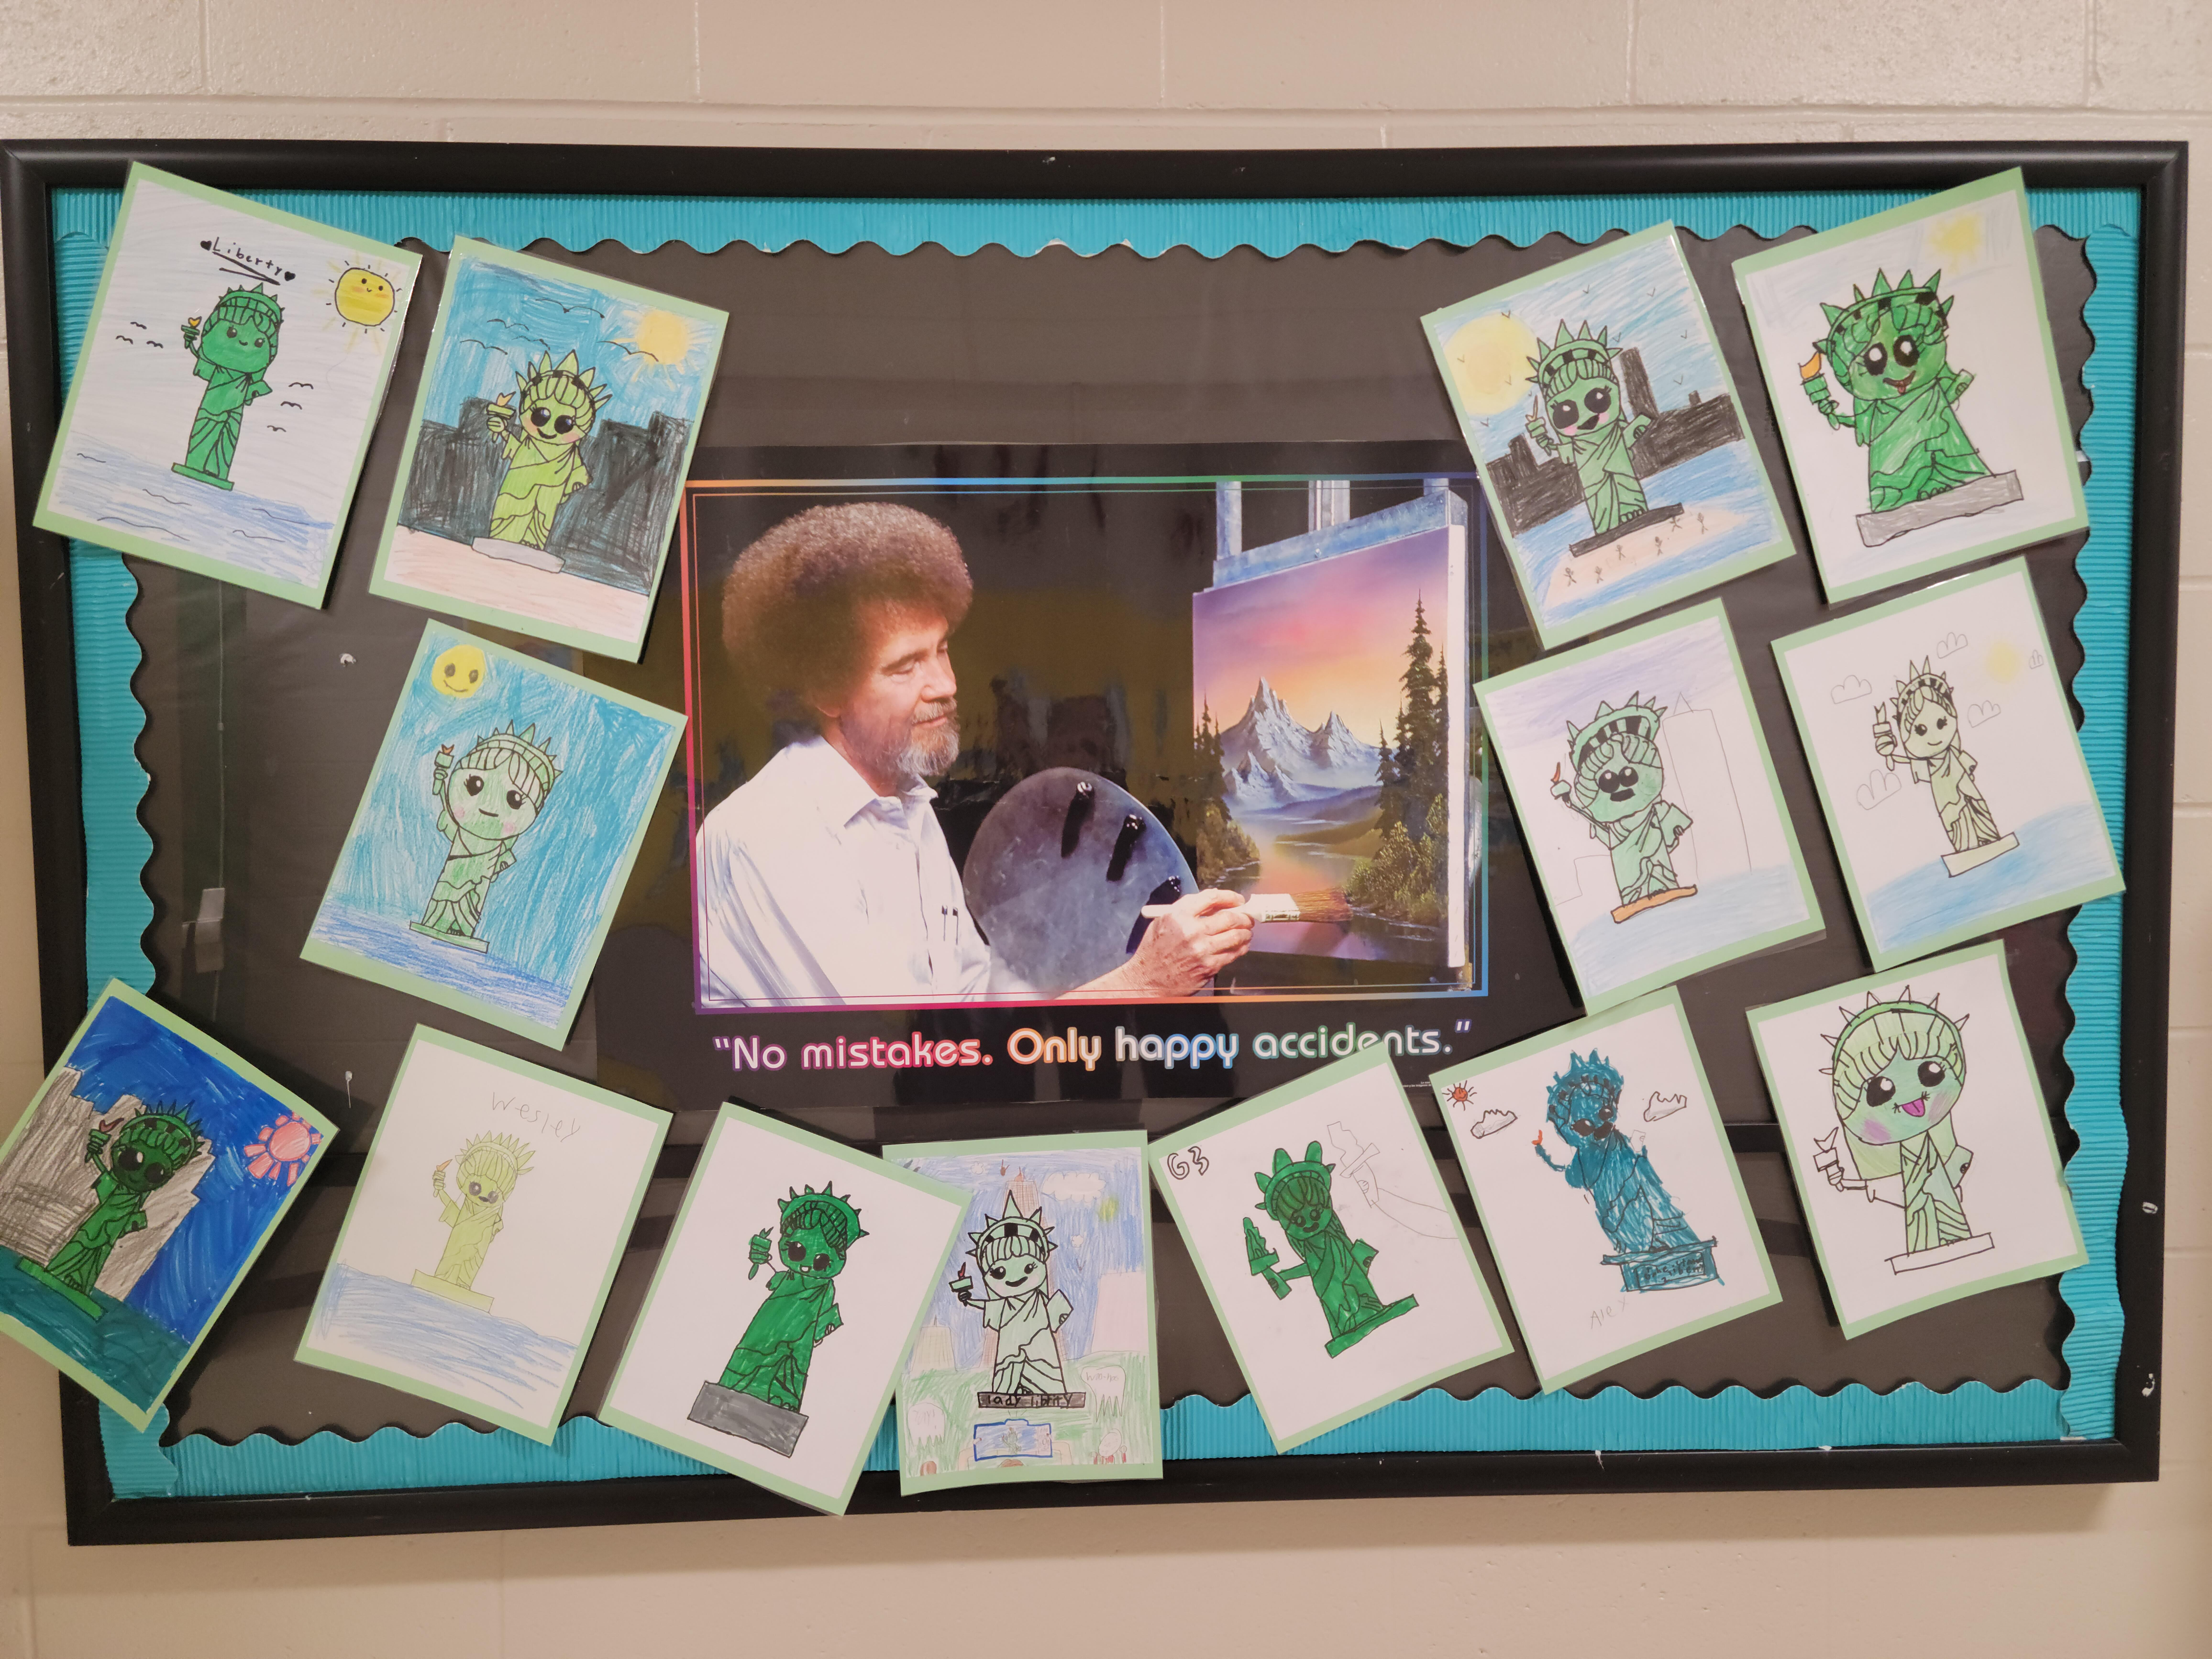 Read More "No mistakes. Only happy accidents." Bob Ross